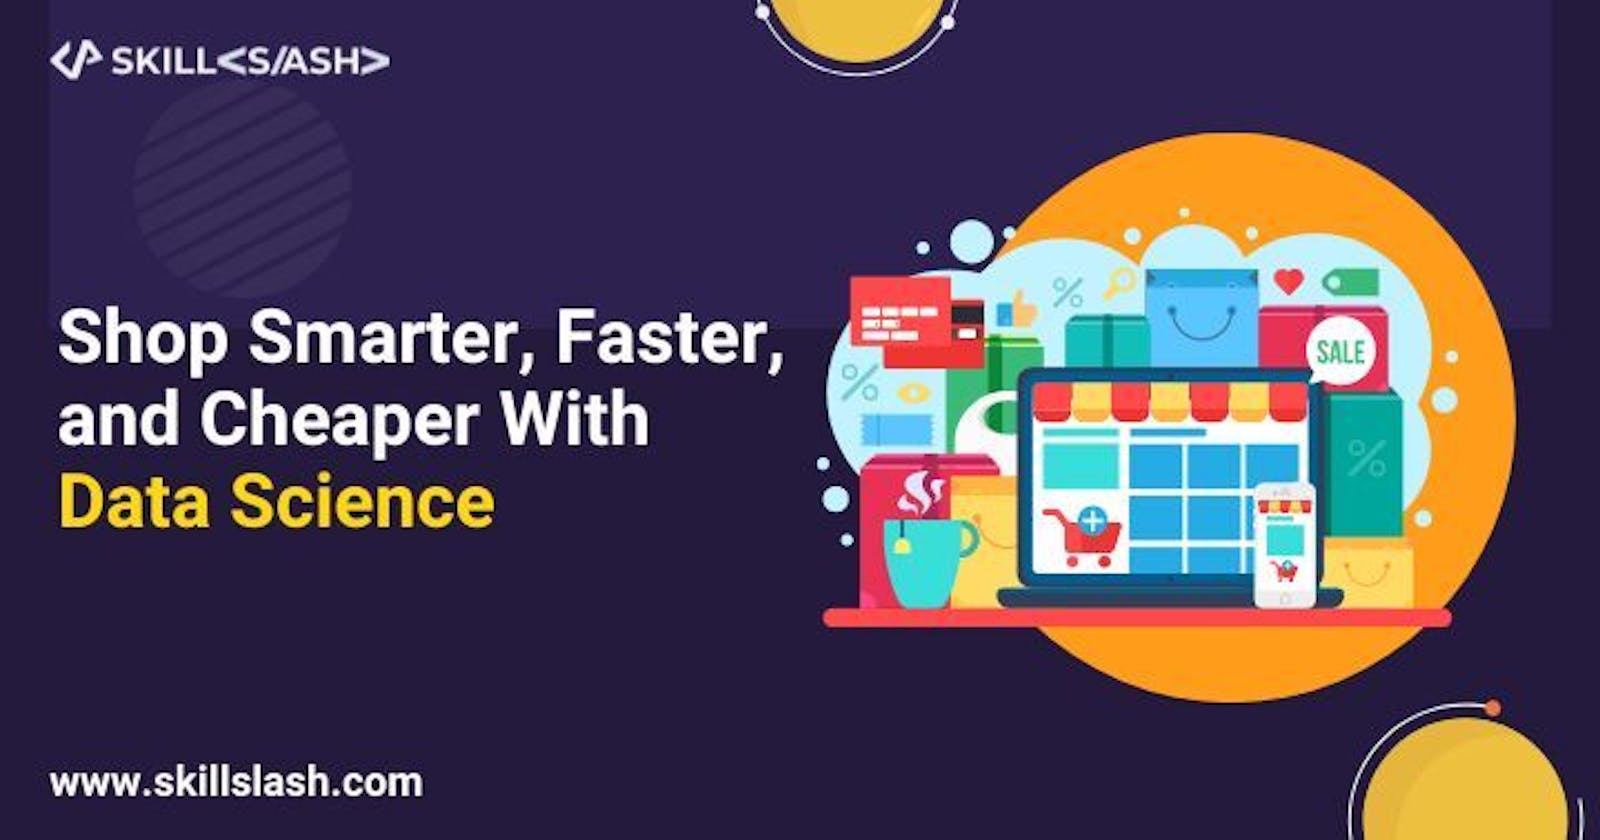 Shop Smarter, Faster, and Cheaper With Data Science